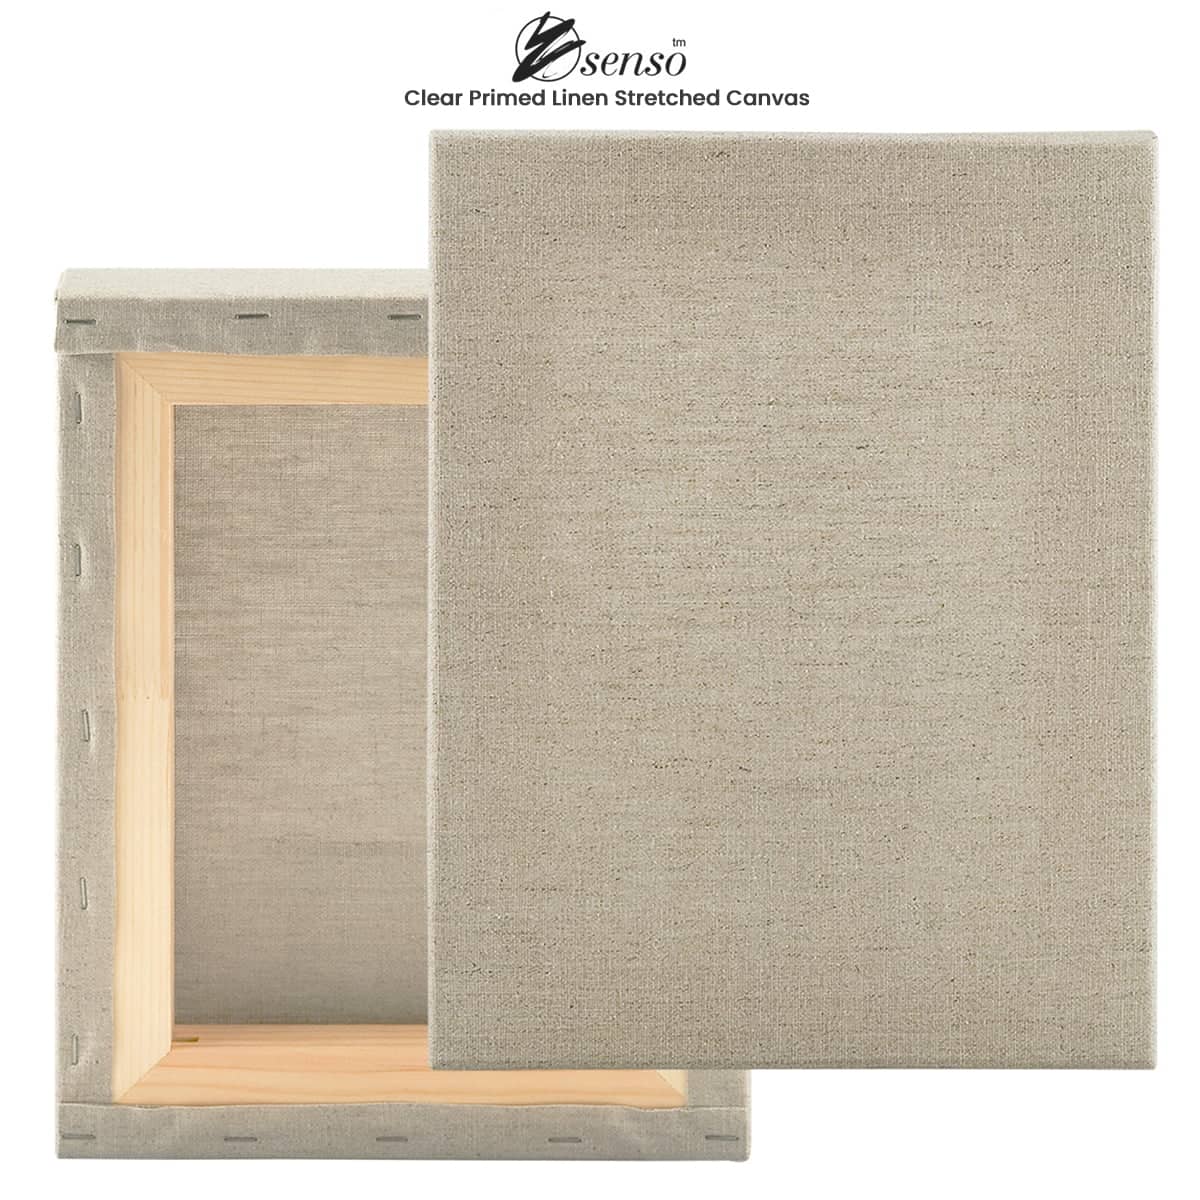 Senso Clear Primed Linen Stretched Canvas 1-1/2 Deep